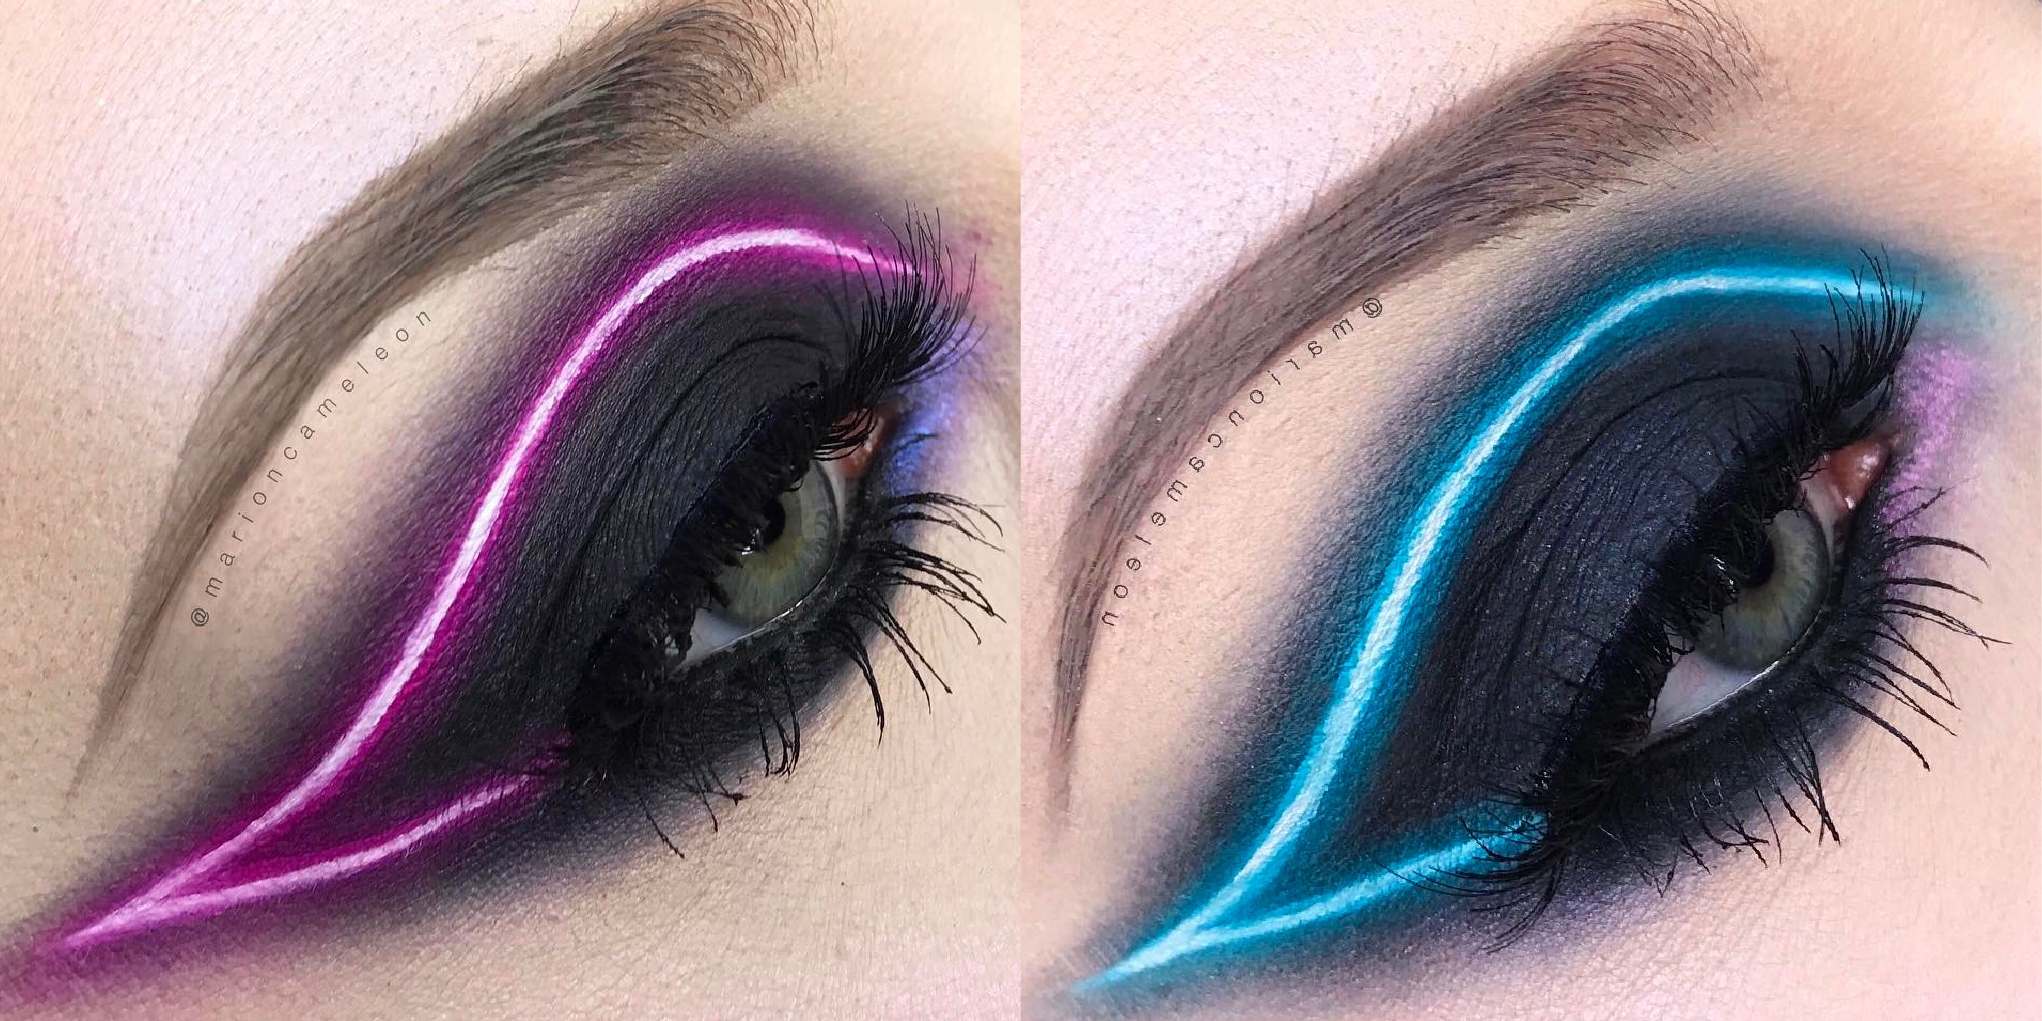 Pretty Light Eye Makeup You Need To Try The New Neon Light Makeup Trend